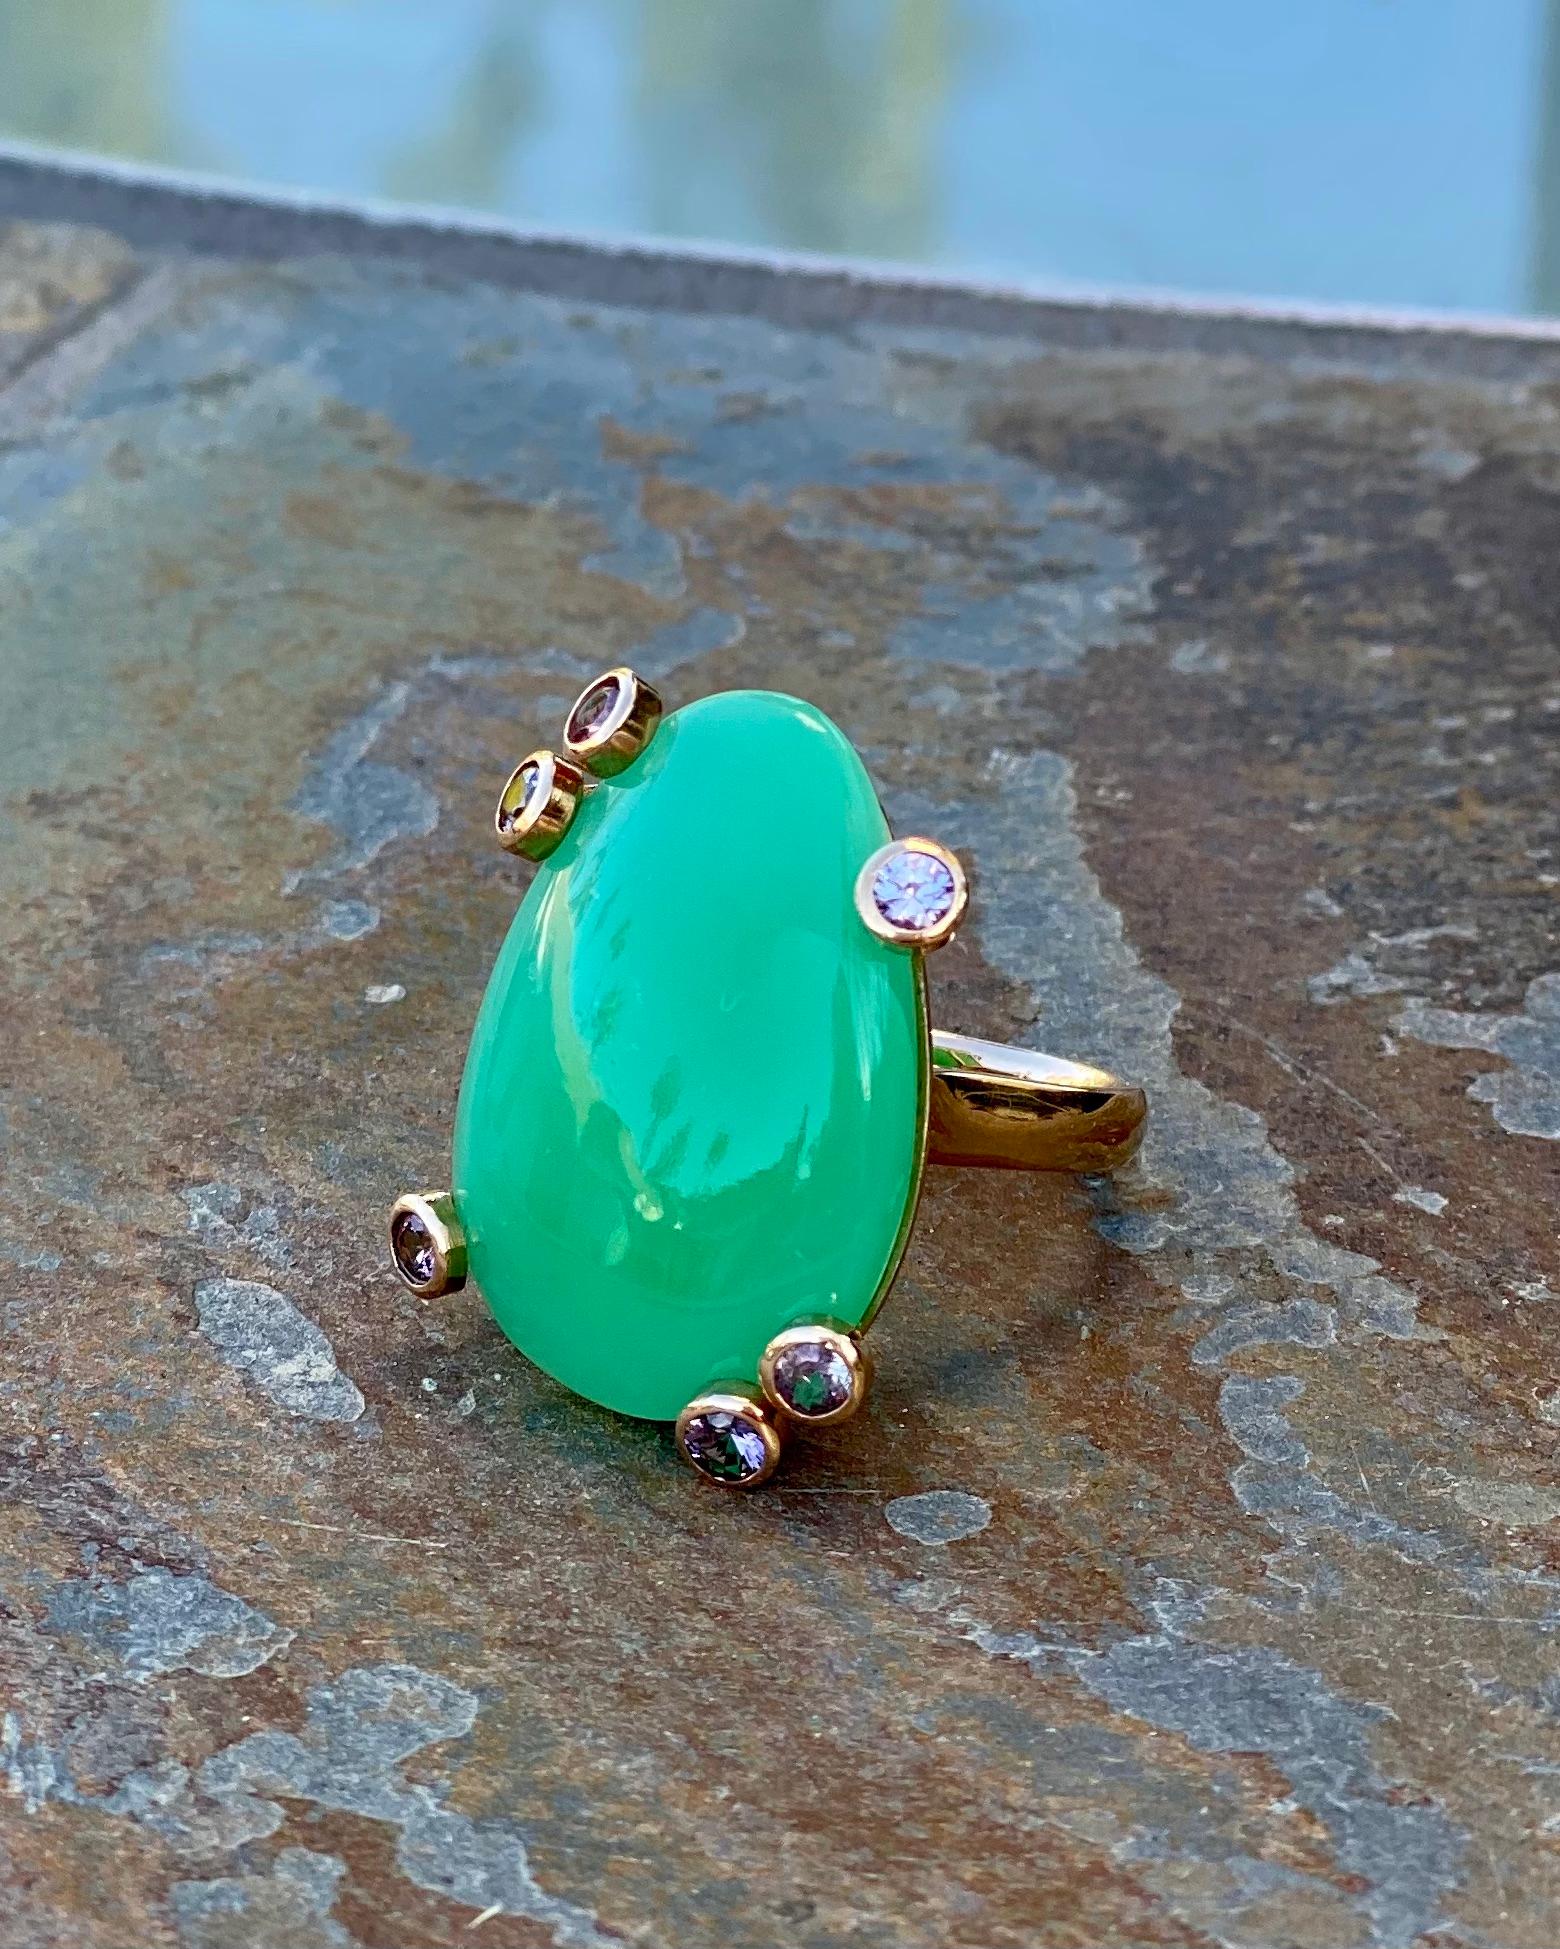 A fancy shape, apple green chrysoprase and spinel cocktail ring, handcrafted in 18 karat yellow gold.

This one-of-a-kind apple green chrysoprase cocktail ring makes a big statement. A beautiful fancy shape, it is accented by purple spinels that